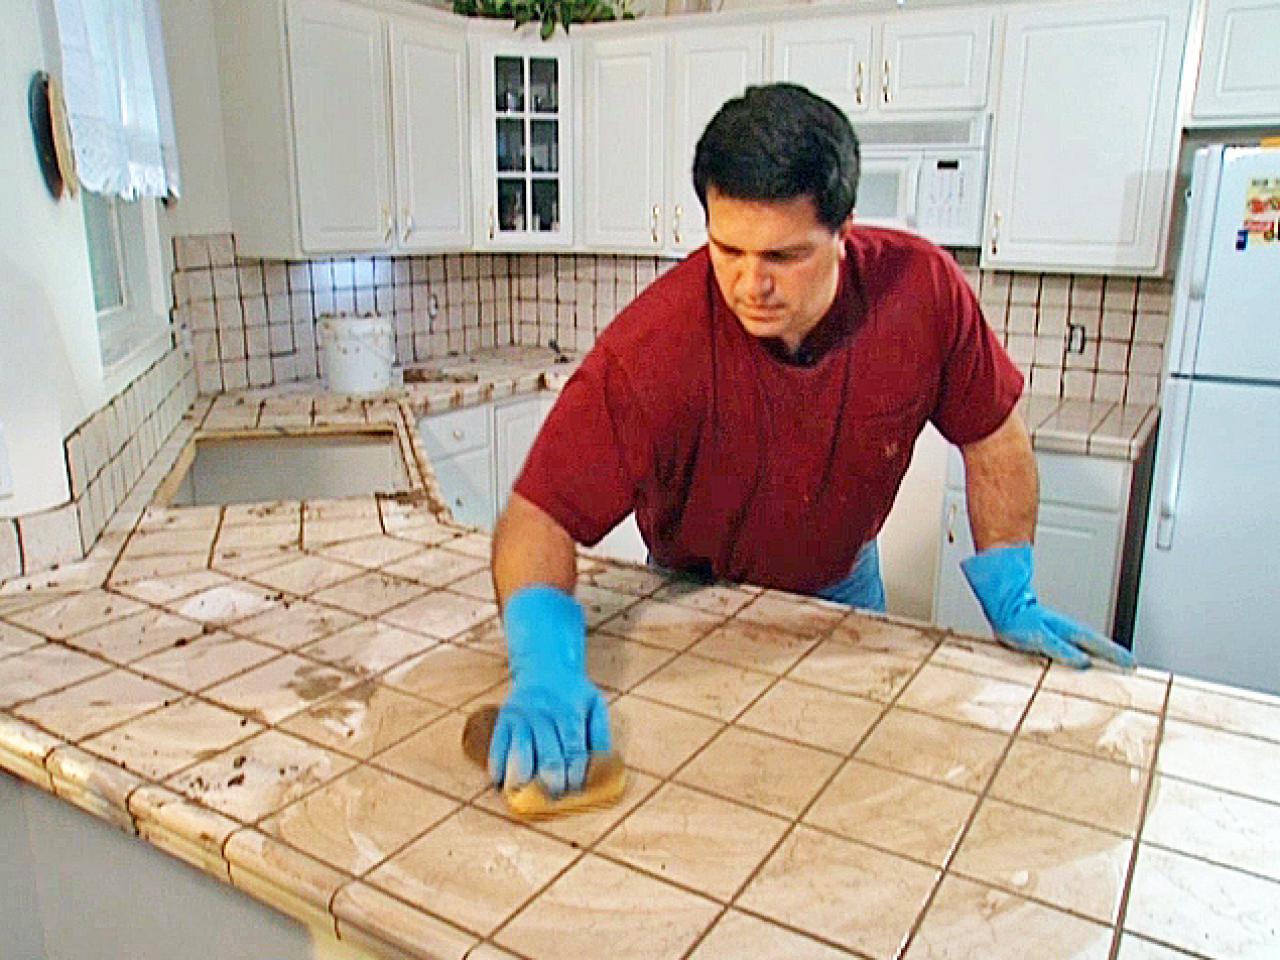 Install Tile Over Laminate Countertop, How To Cover Ceramic Tile Countertops